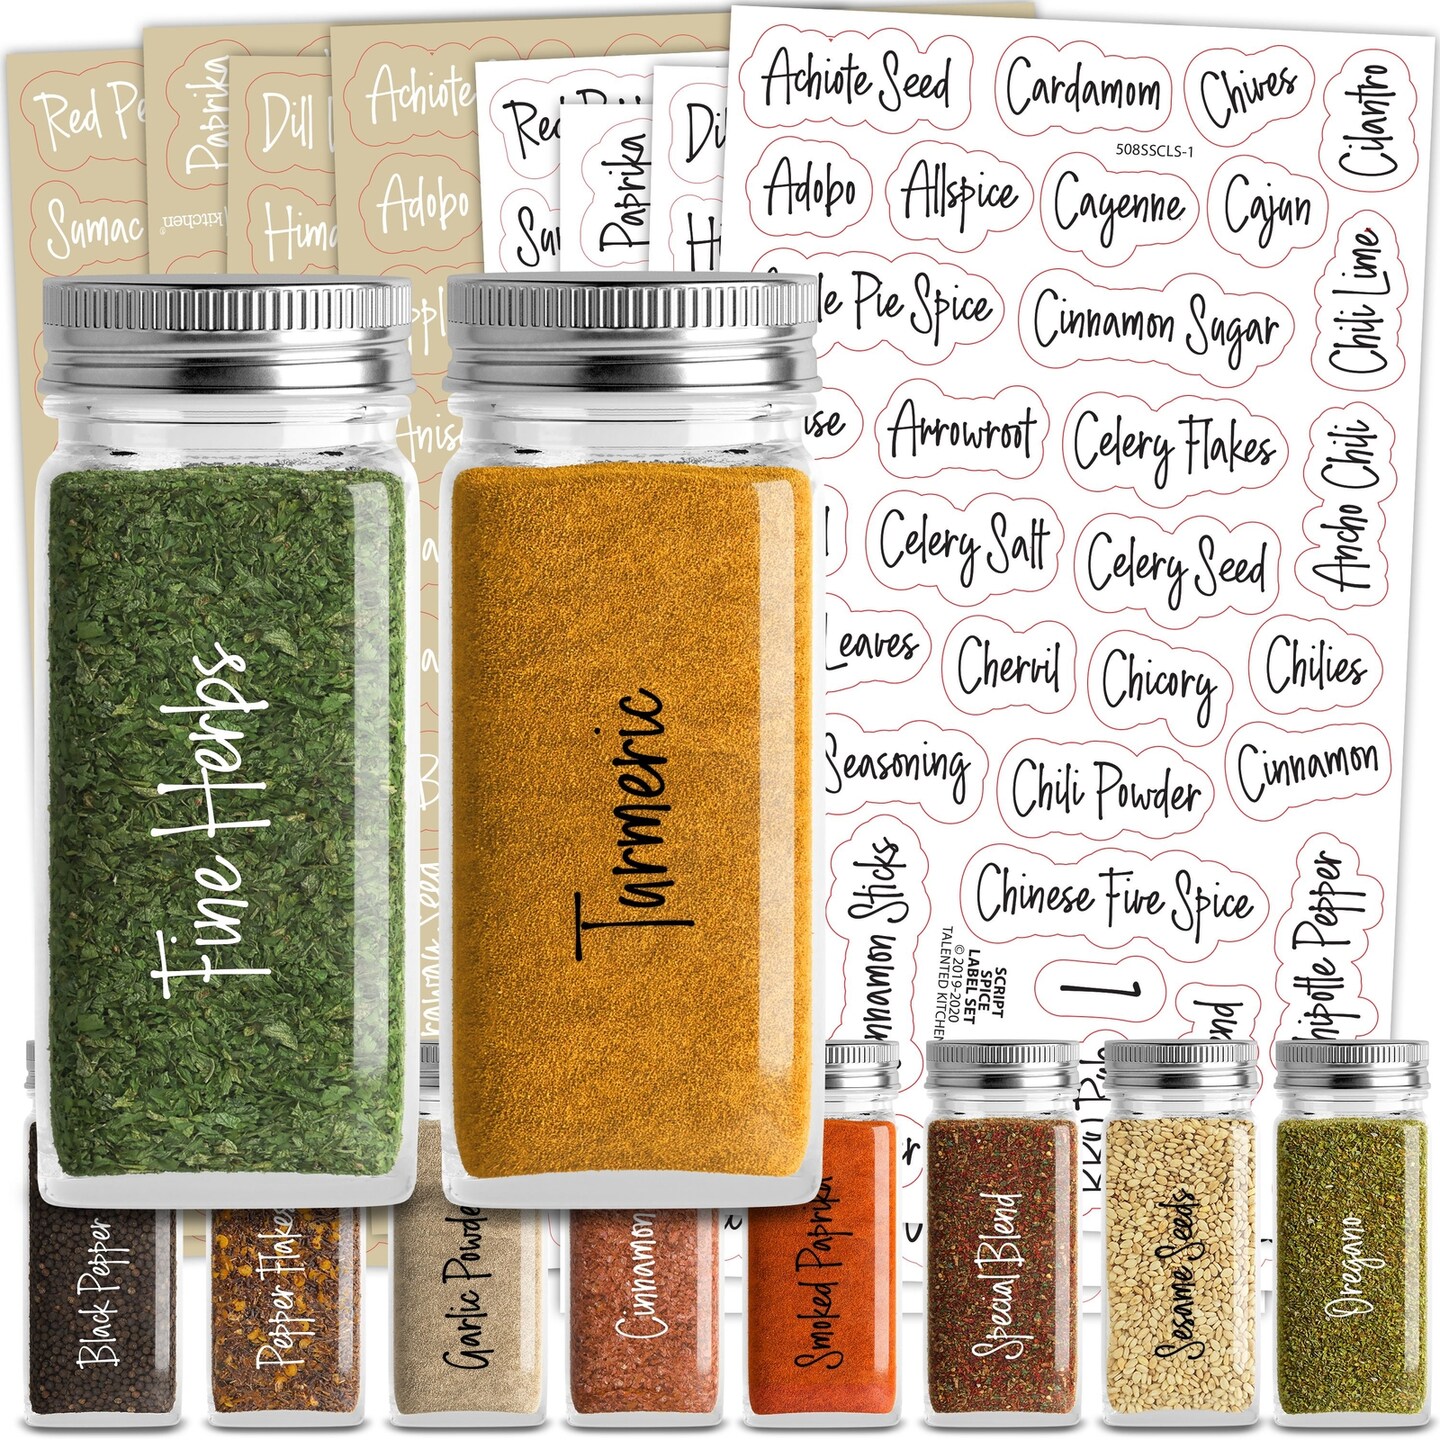 Talented Kitchen 272 Spice Labels Stickers, Clear Spice Jar Labels